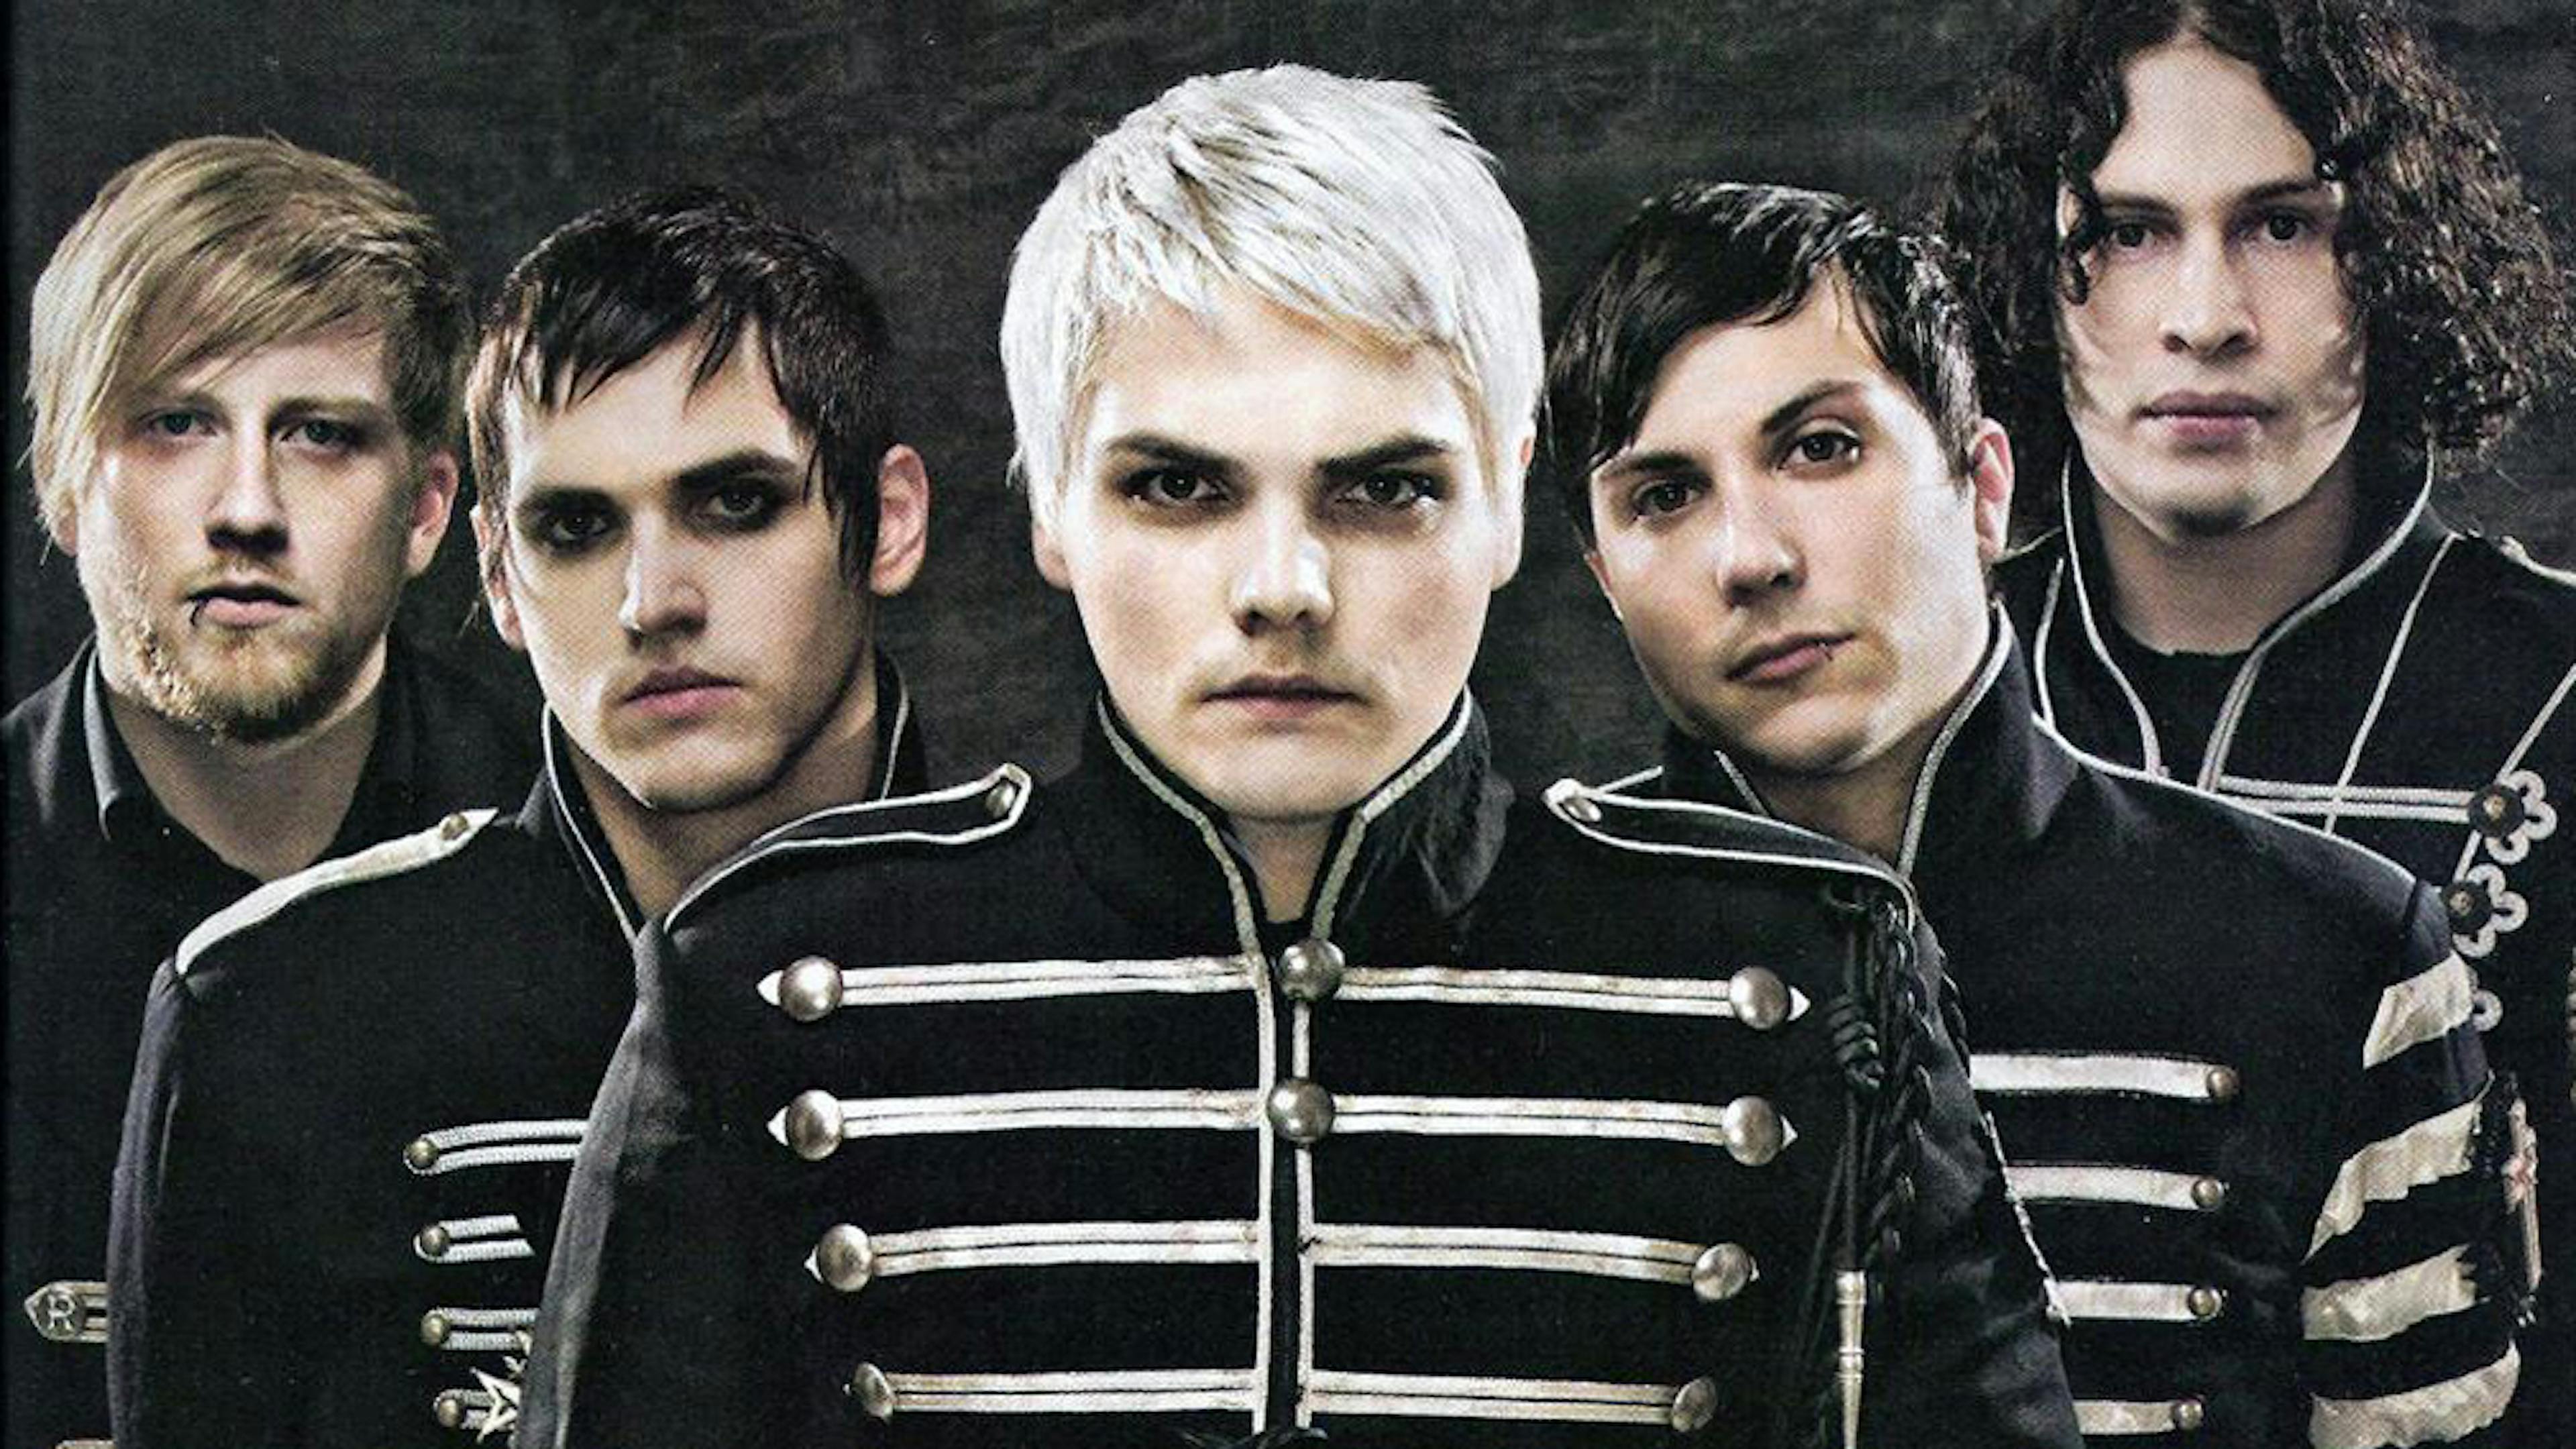 Listen: Gerard Way reflects on My Chemical Romance's Welcome To The Black Parade on new podcast